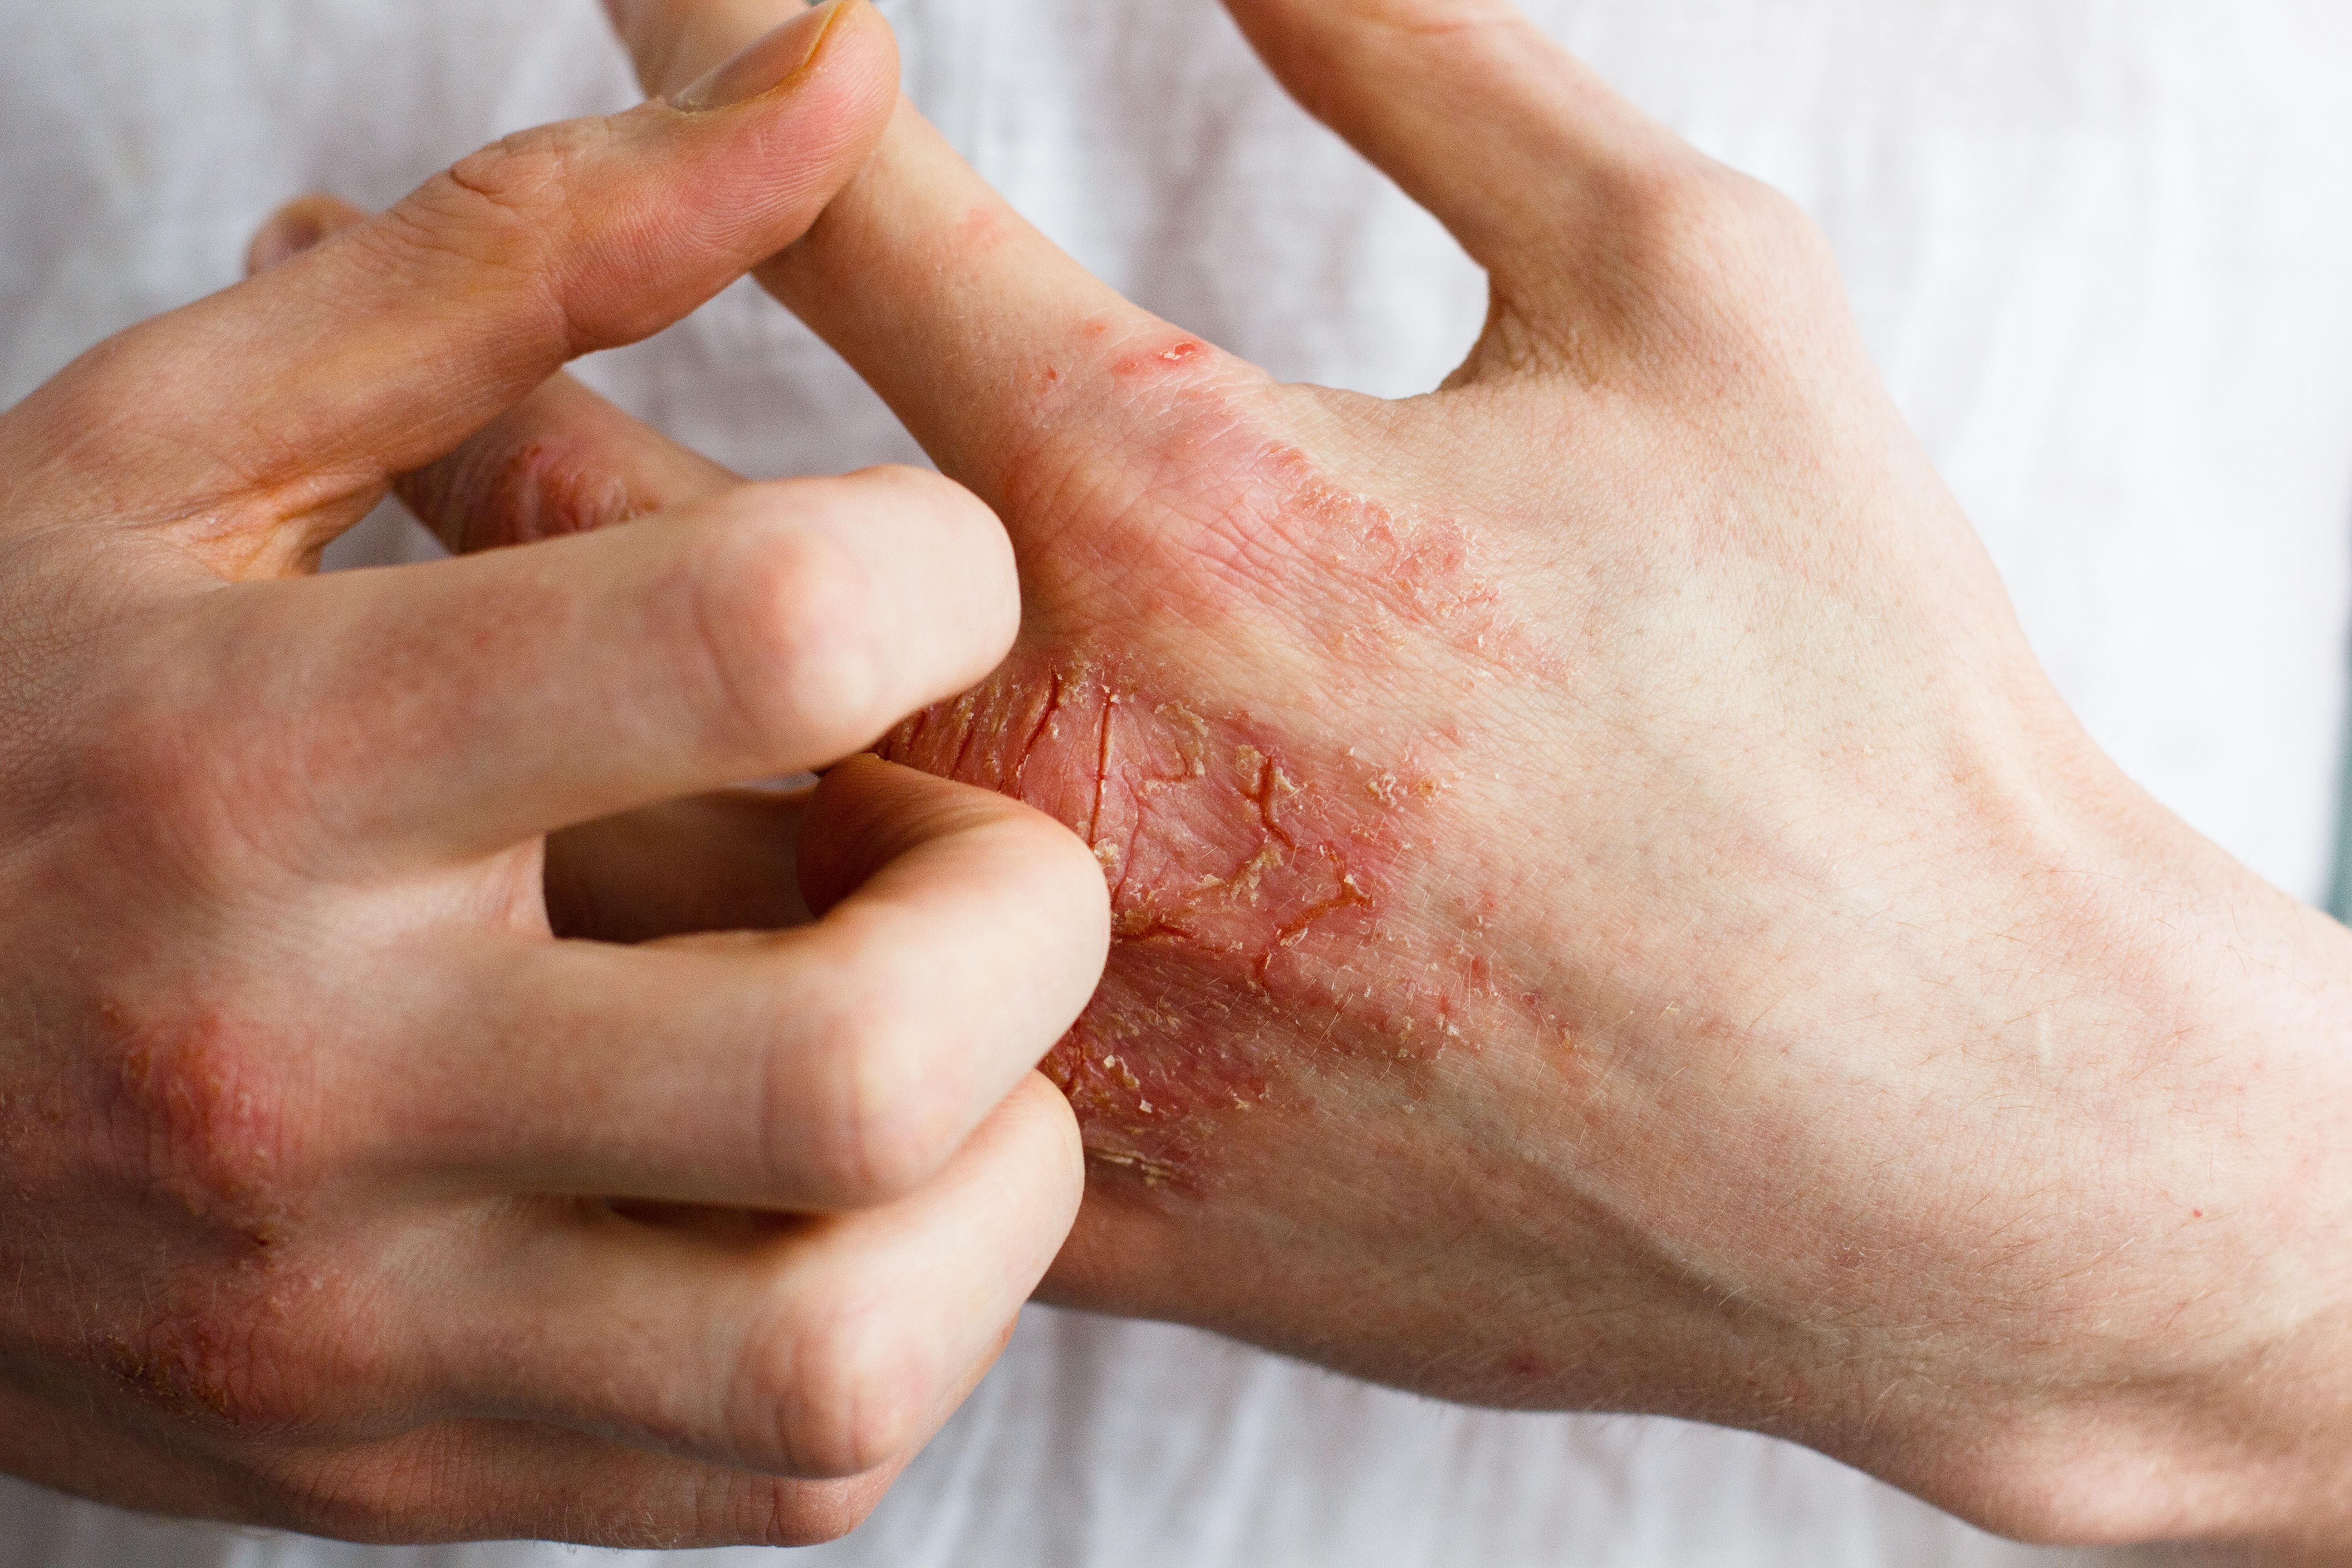 How do you tell the difference between eczema and skin cancer?